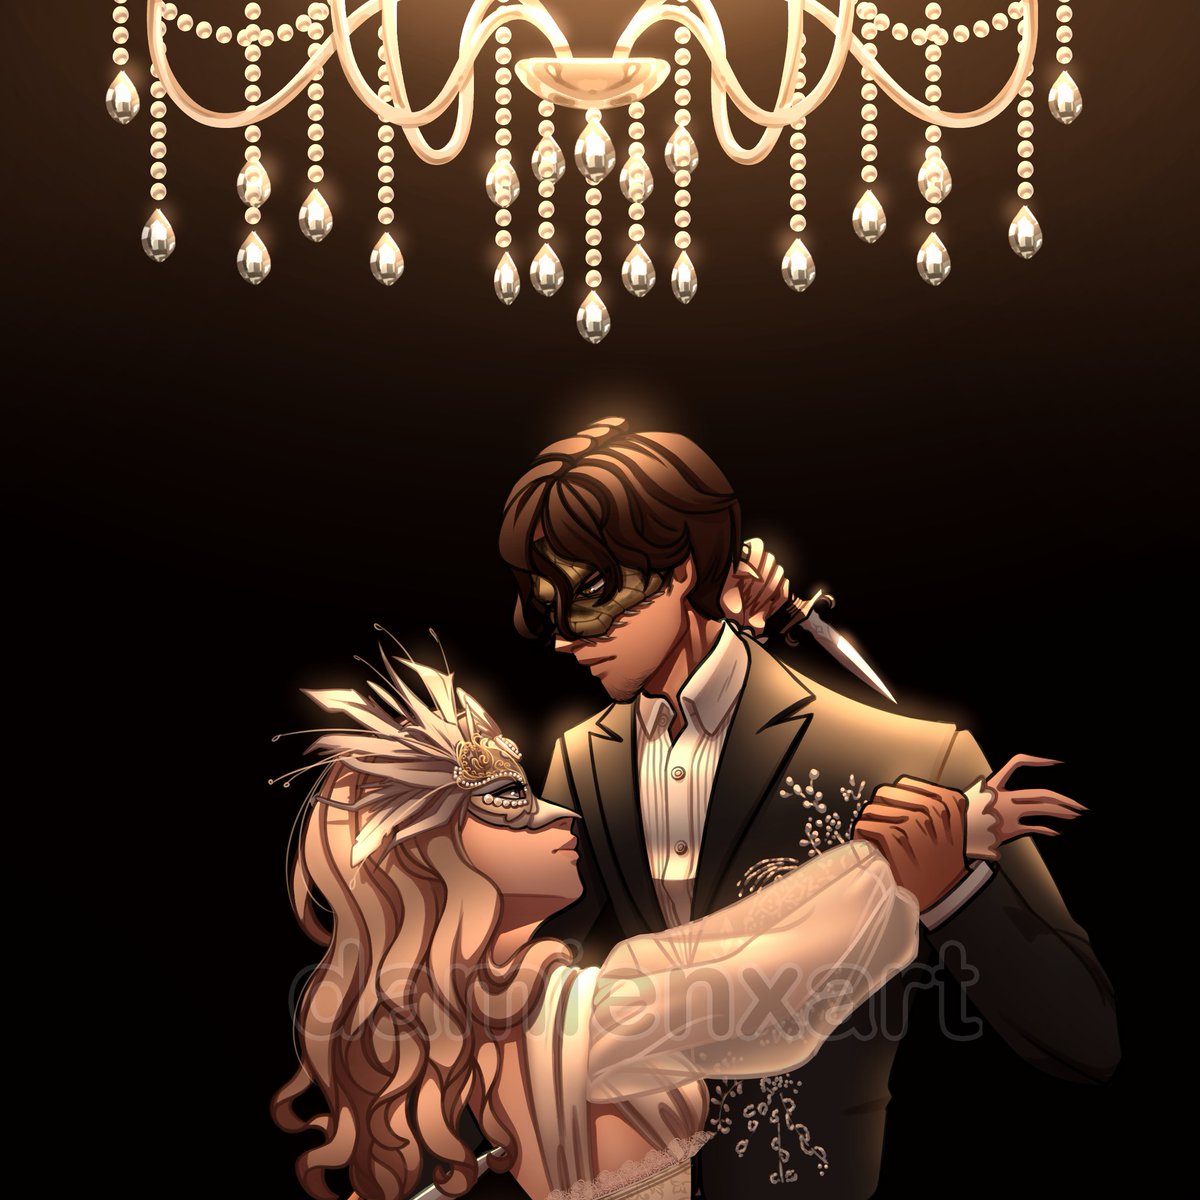 ``Vincent and Zinaida: eternal partners in a sadistic waltz until the day one of them can’t dance any longer. Together for eternity, till death do us apart.`` Special commission for @RoseWritesAlot of her OC Zinaida and @monochr0med's OC Vincent in a masquerade-themed setting.